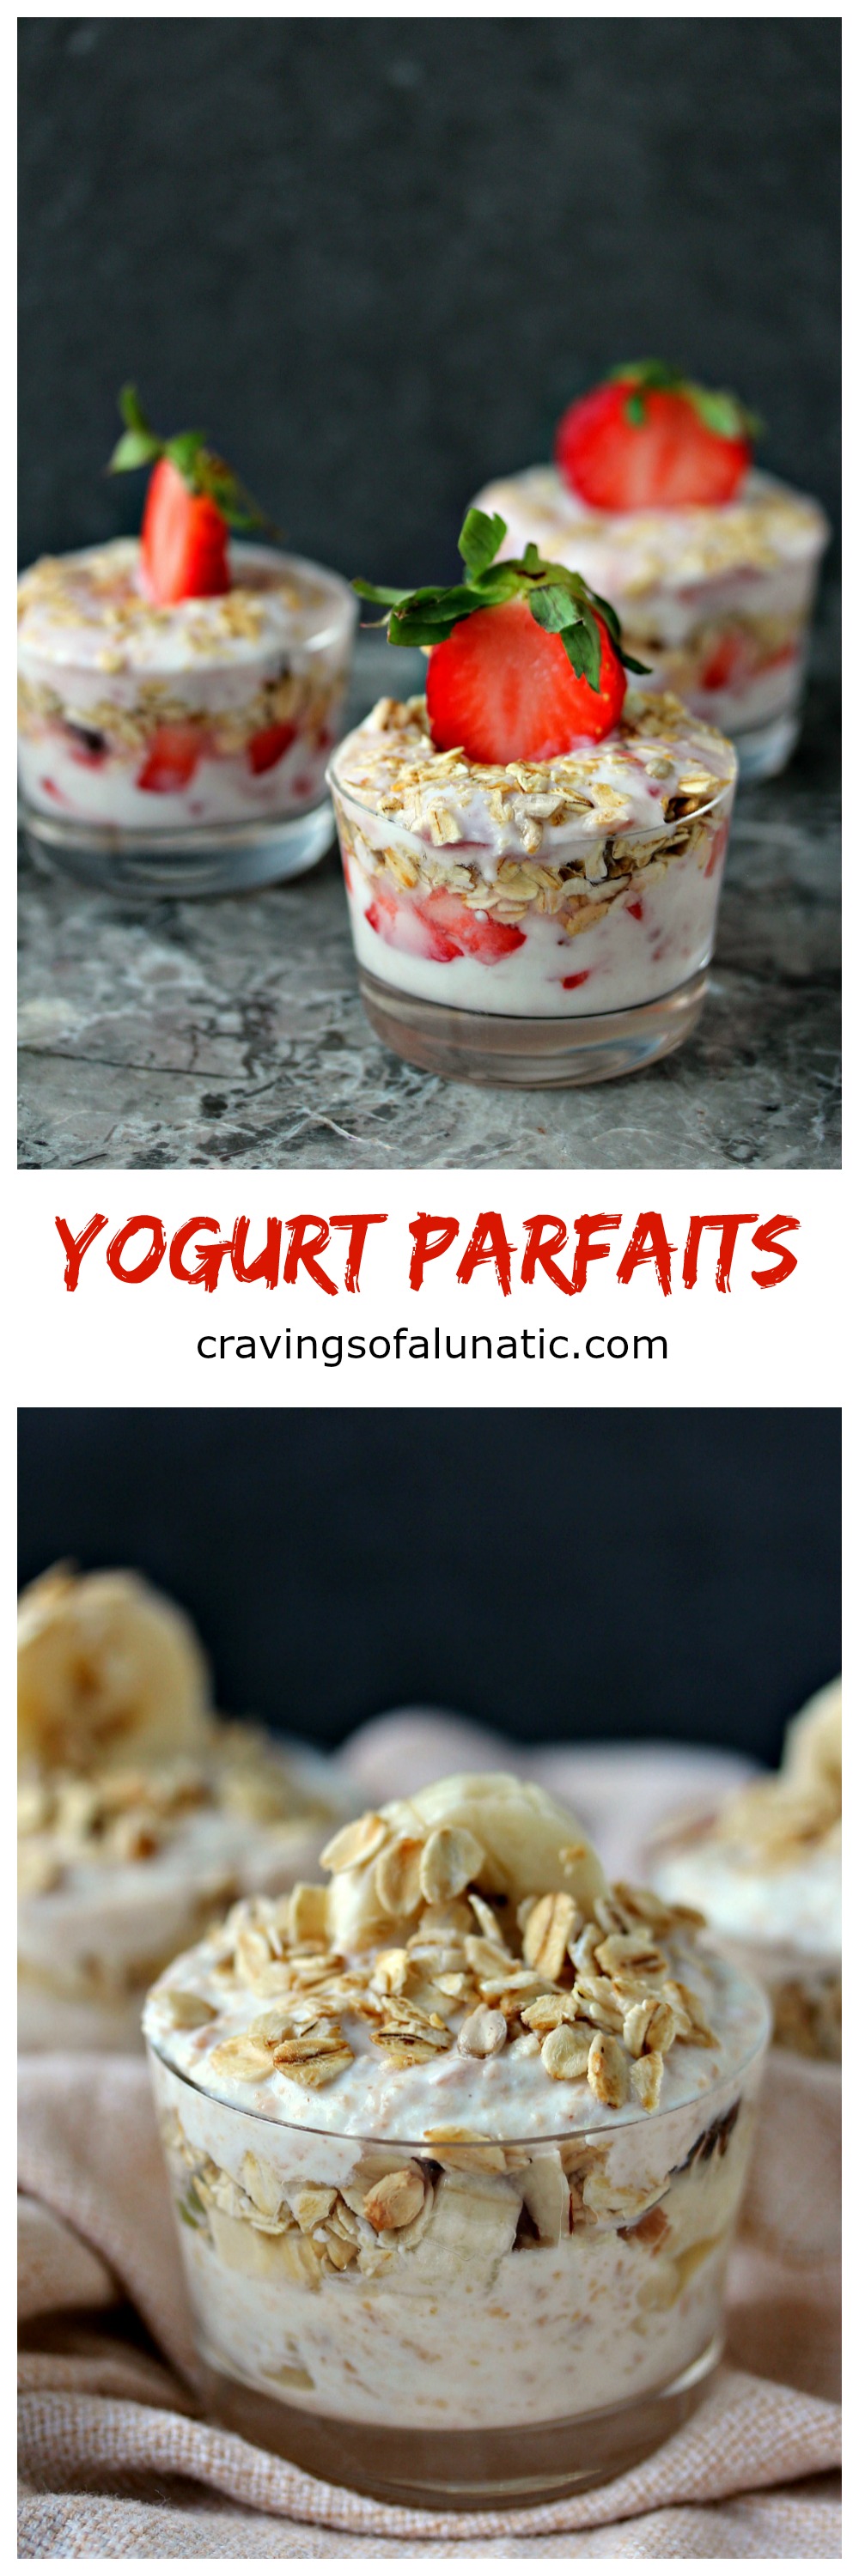 Yogurt Parfaits from cravingsofalunatic.com- Snacking should be fun and easy. These yogurt parfaits are so simple to personalize to your own taste. These Strawberry Yogurt Parfaits are layered strawberry jam and fresh strawberries. (@CravingsLunatic)